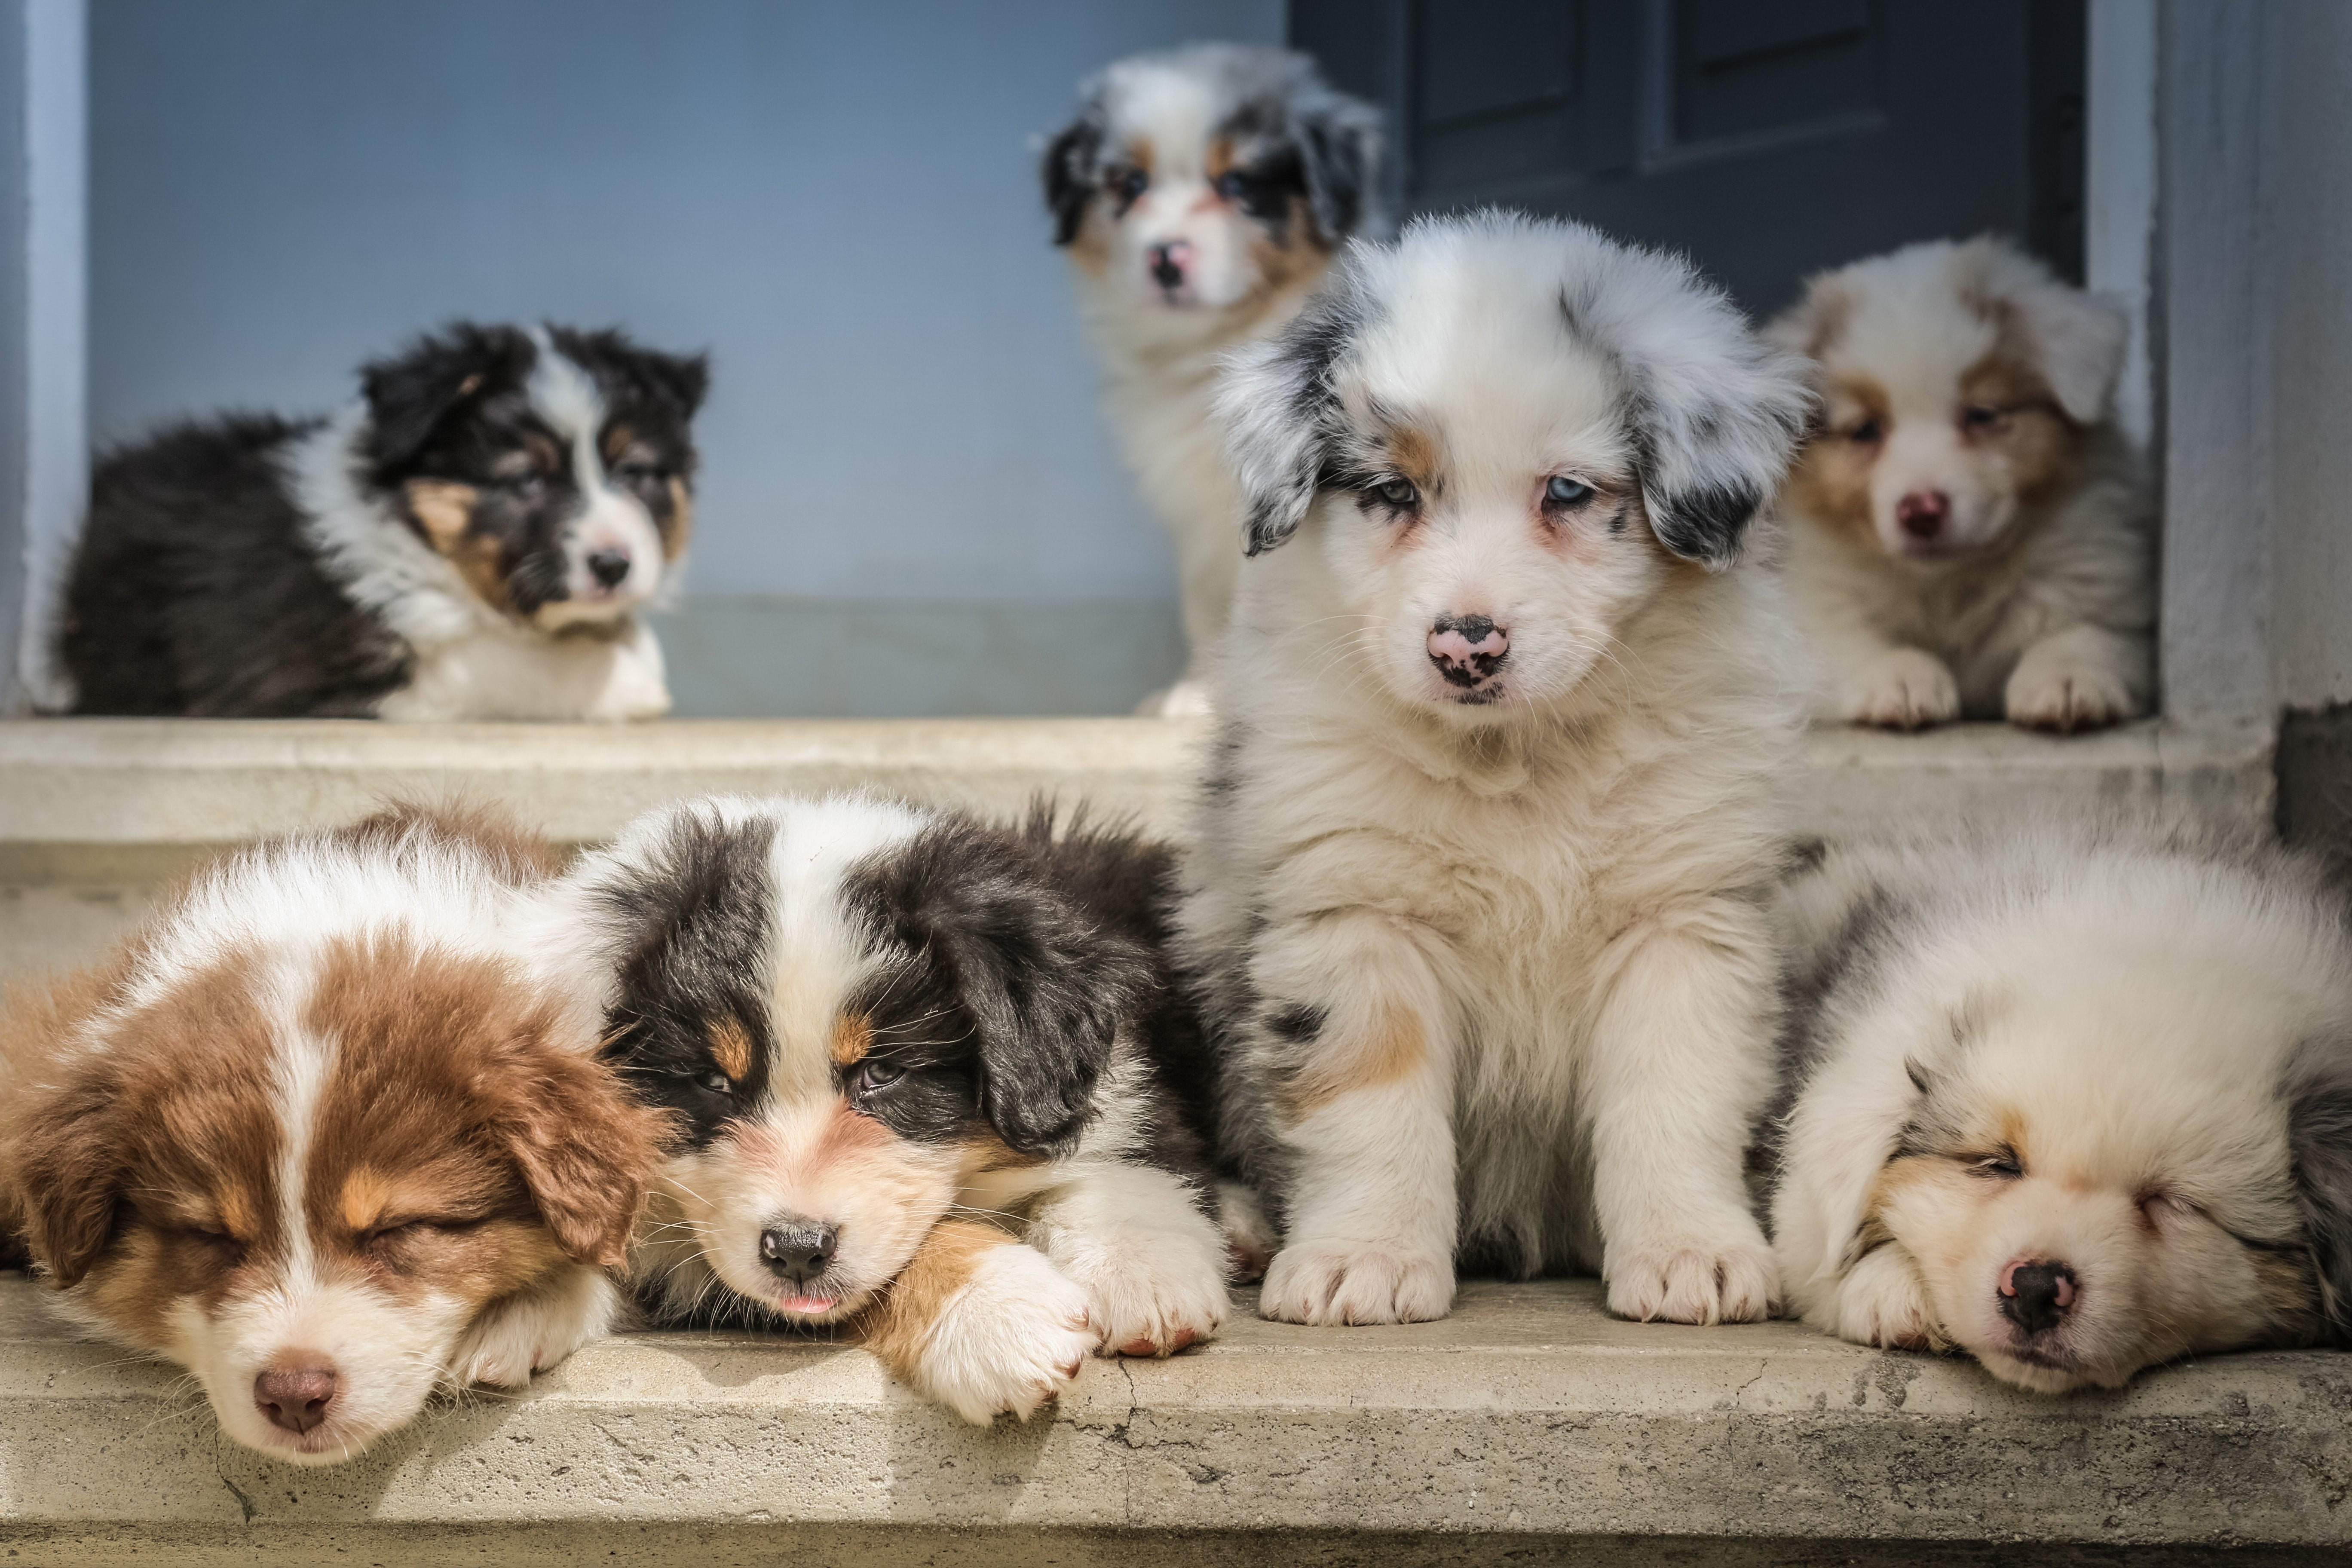 A joyful group of various puppies socializing and hanging out together on a staircase, showcasing the essence of canine camaraderie and friendship.